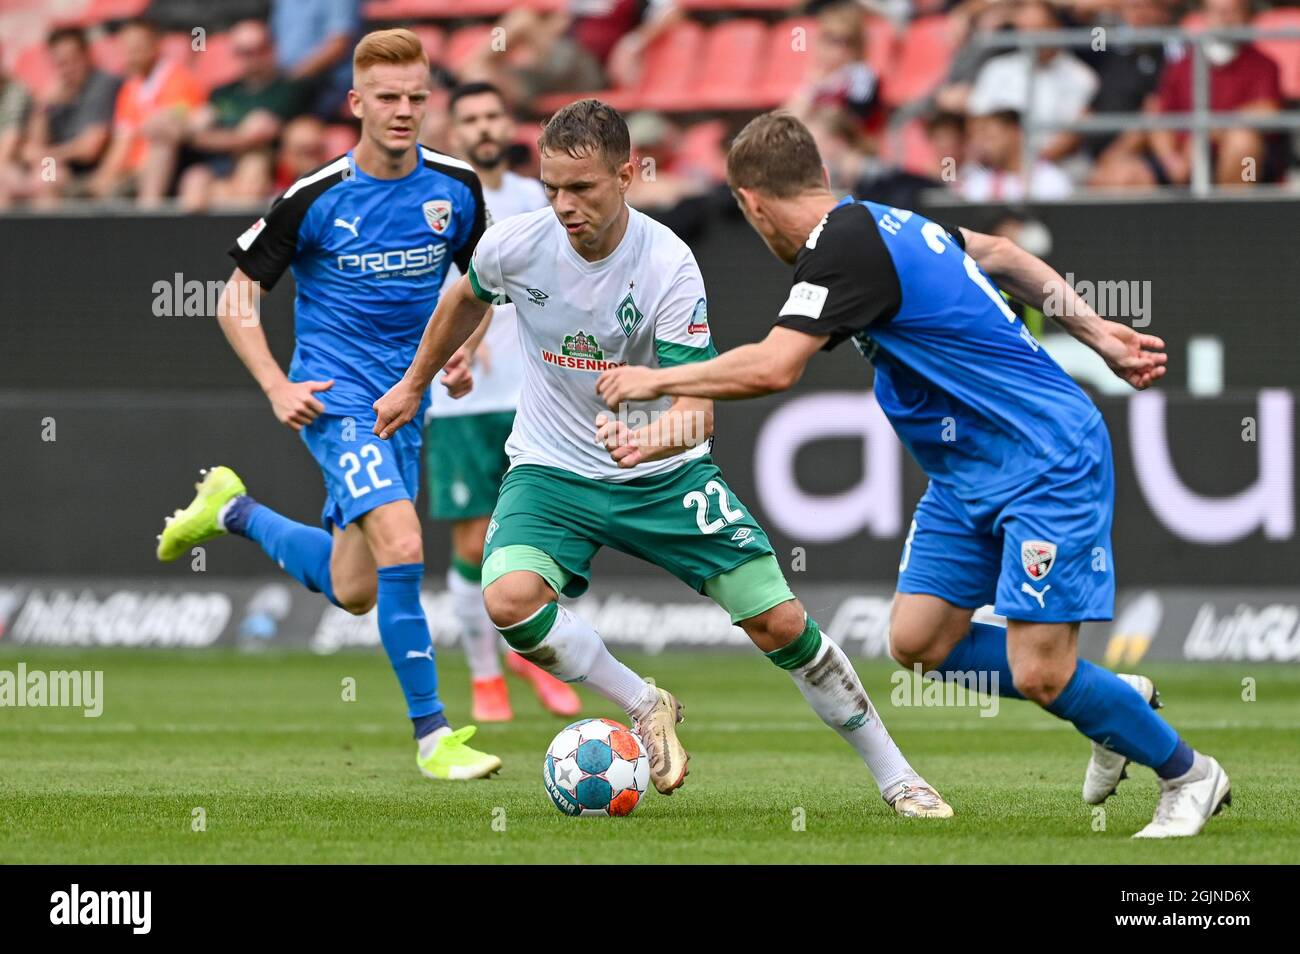 Ingolstadt, Germany. 11th Sep, 2021. Football: 2. Bundesliga, FC Ingolstadt 04 - Werder Bremen, Matchday 6, Audi Sportpark. Bremen's Niklas Schmidt (centre) fights for the ball with Ingolstadt's Denis Linsmayer (right). Credit: Armin Weigel/dpa - IMPORTANT NOTE: In accordance with the regulations of the DFL Deutsche Fußball Liga and/or the DFB Deutscher Fußball-Bund, it is prohibited to use or have used photographs taken in the stadium and/or of the match in the form of sequence pictures and/or video-like photo series./dpa/Alamy Live News Stock Photo